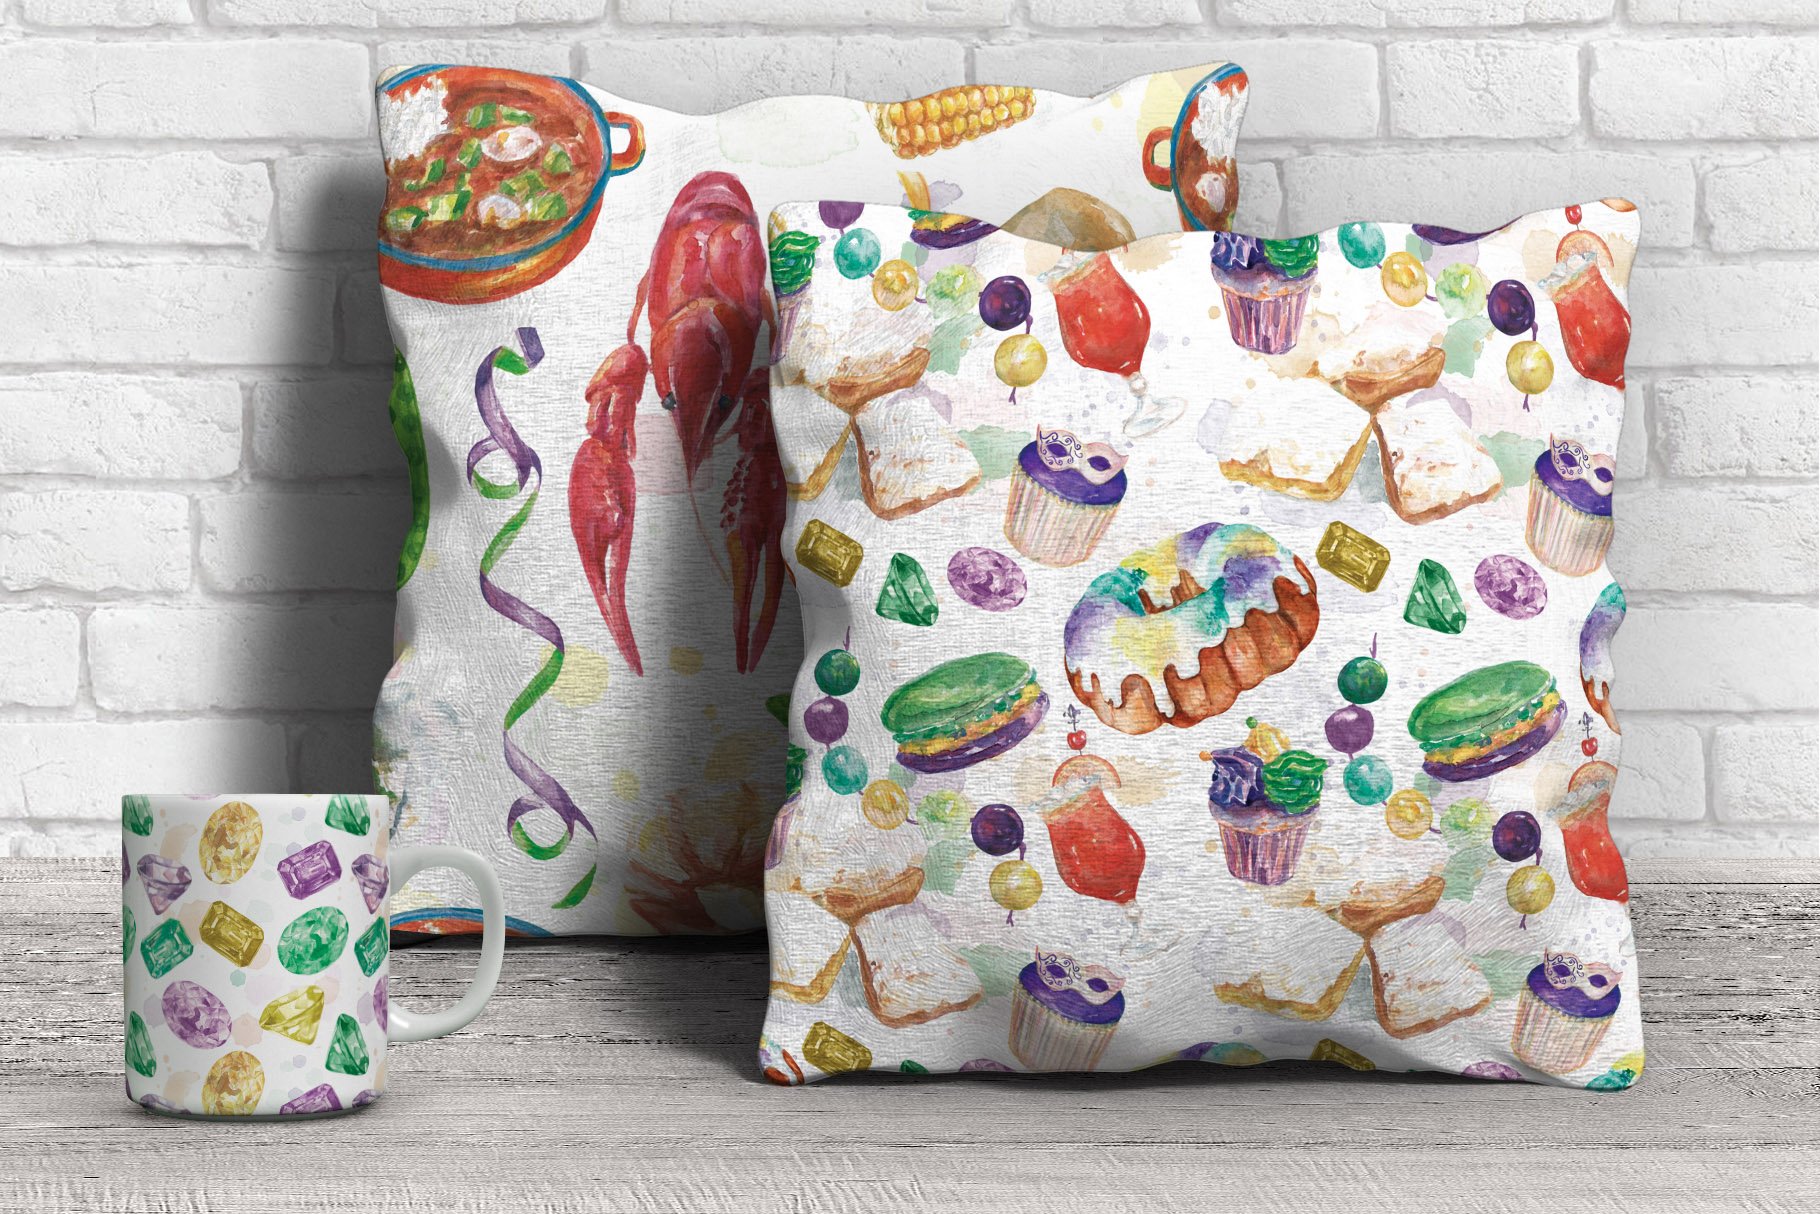 Perfect carnival prints for the your pillows.